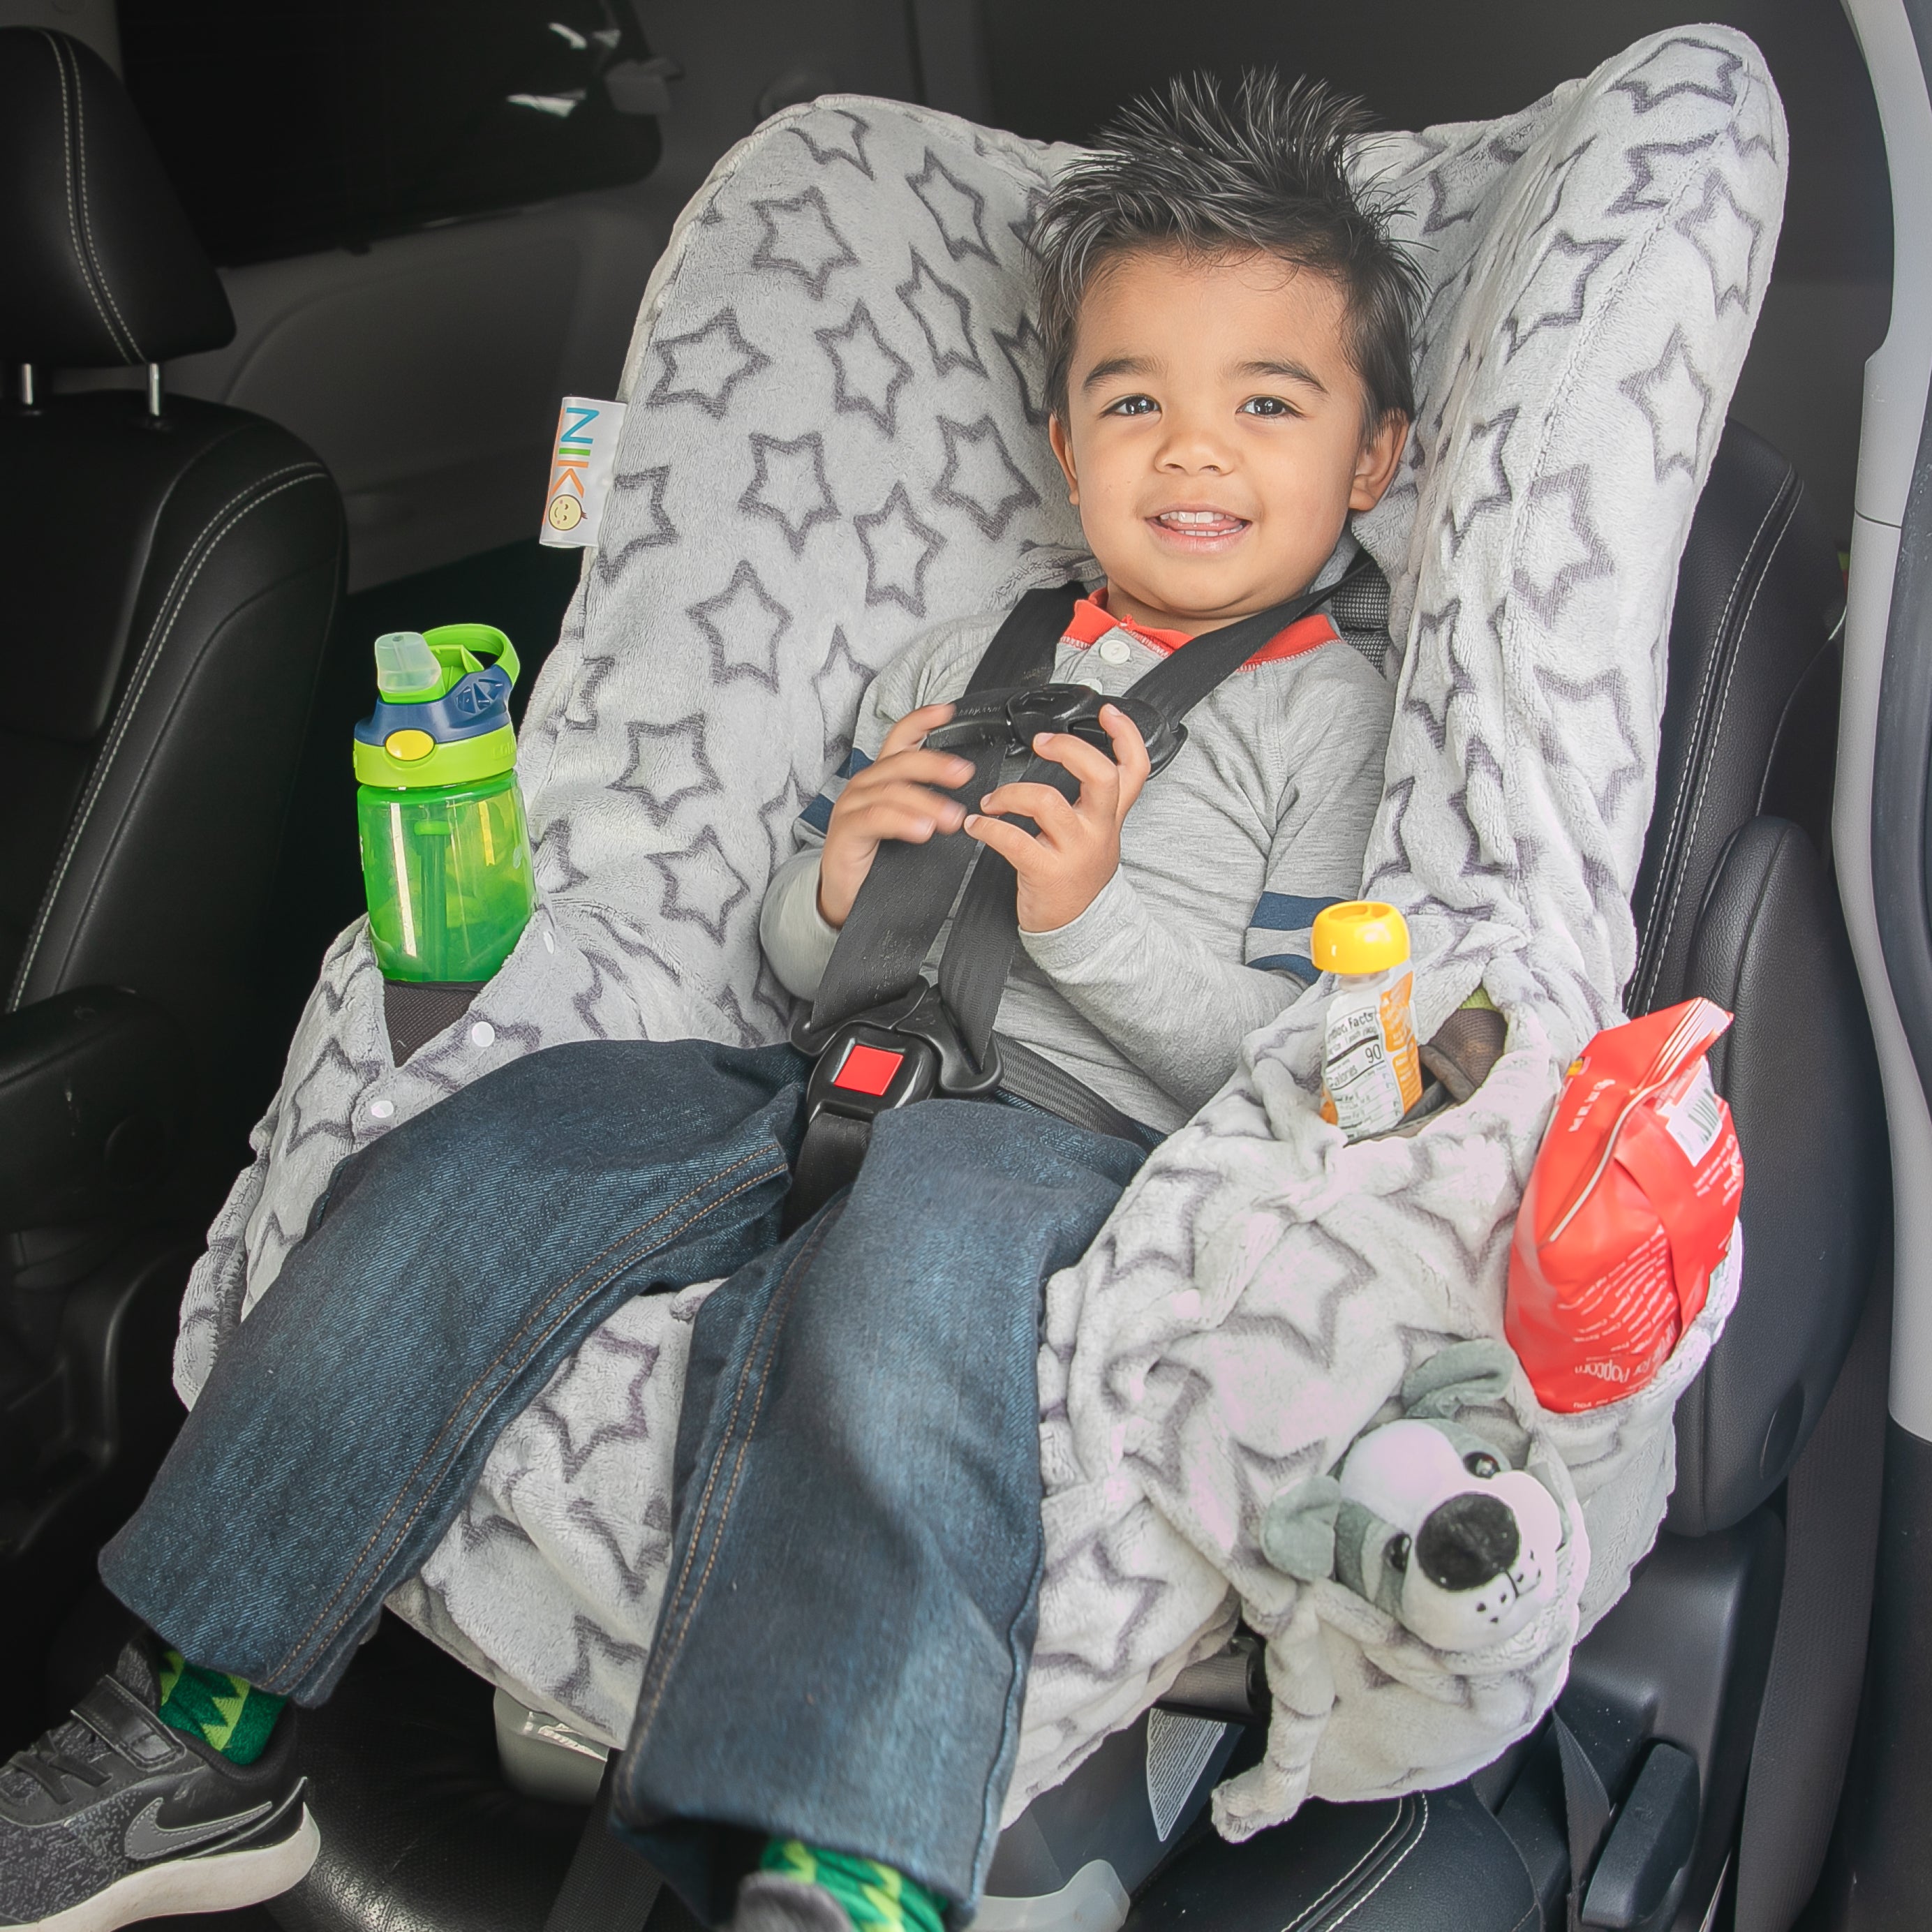 Niko Easy Wash Children's Car Seat Cover & Liner - Minky - Silver Star